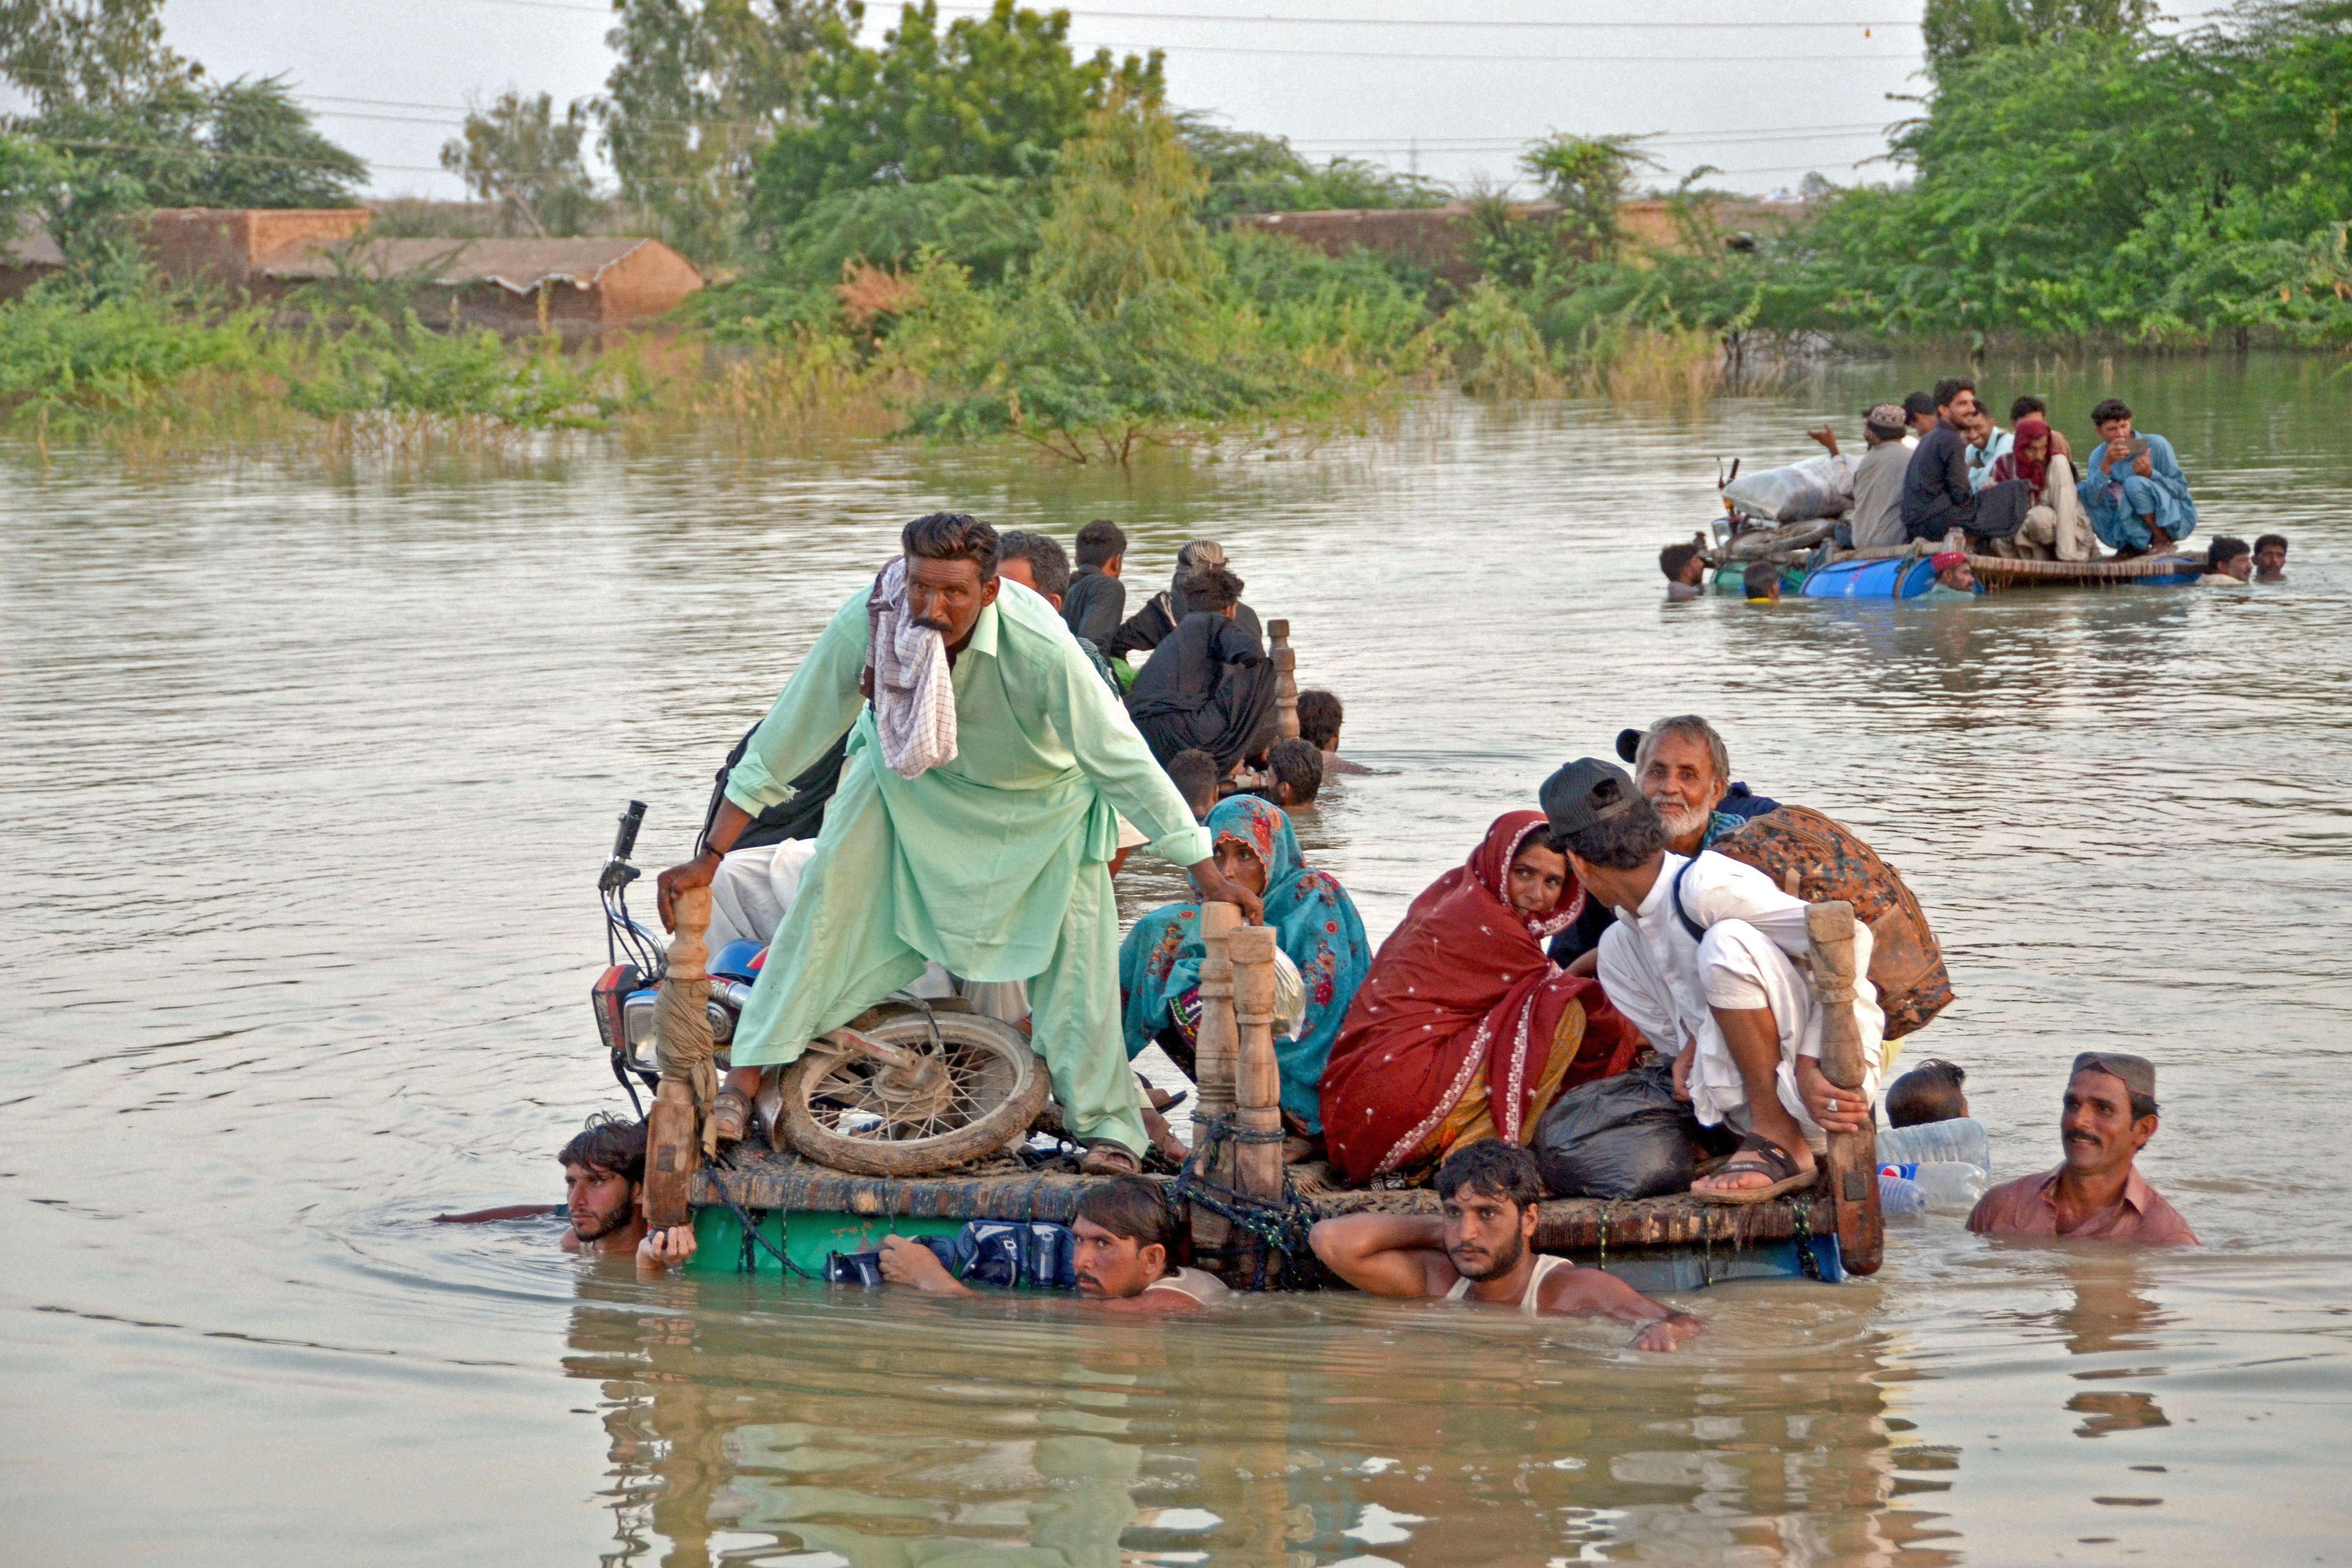 Internally displaced people wade through floodwaters after heavy monsoon rains in Pakistan’s Balochistan province on September 8, 2022.